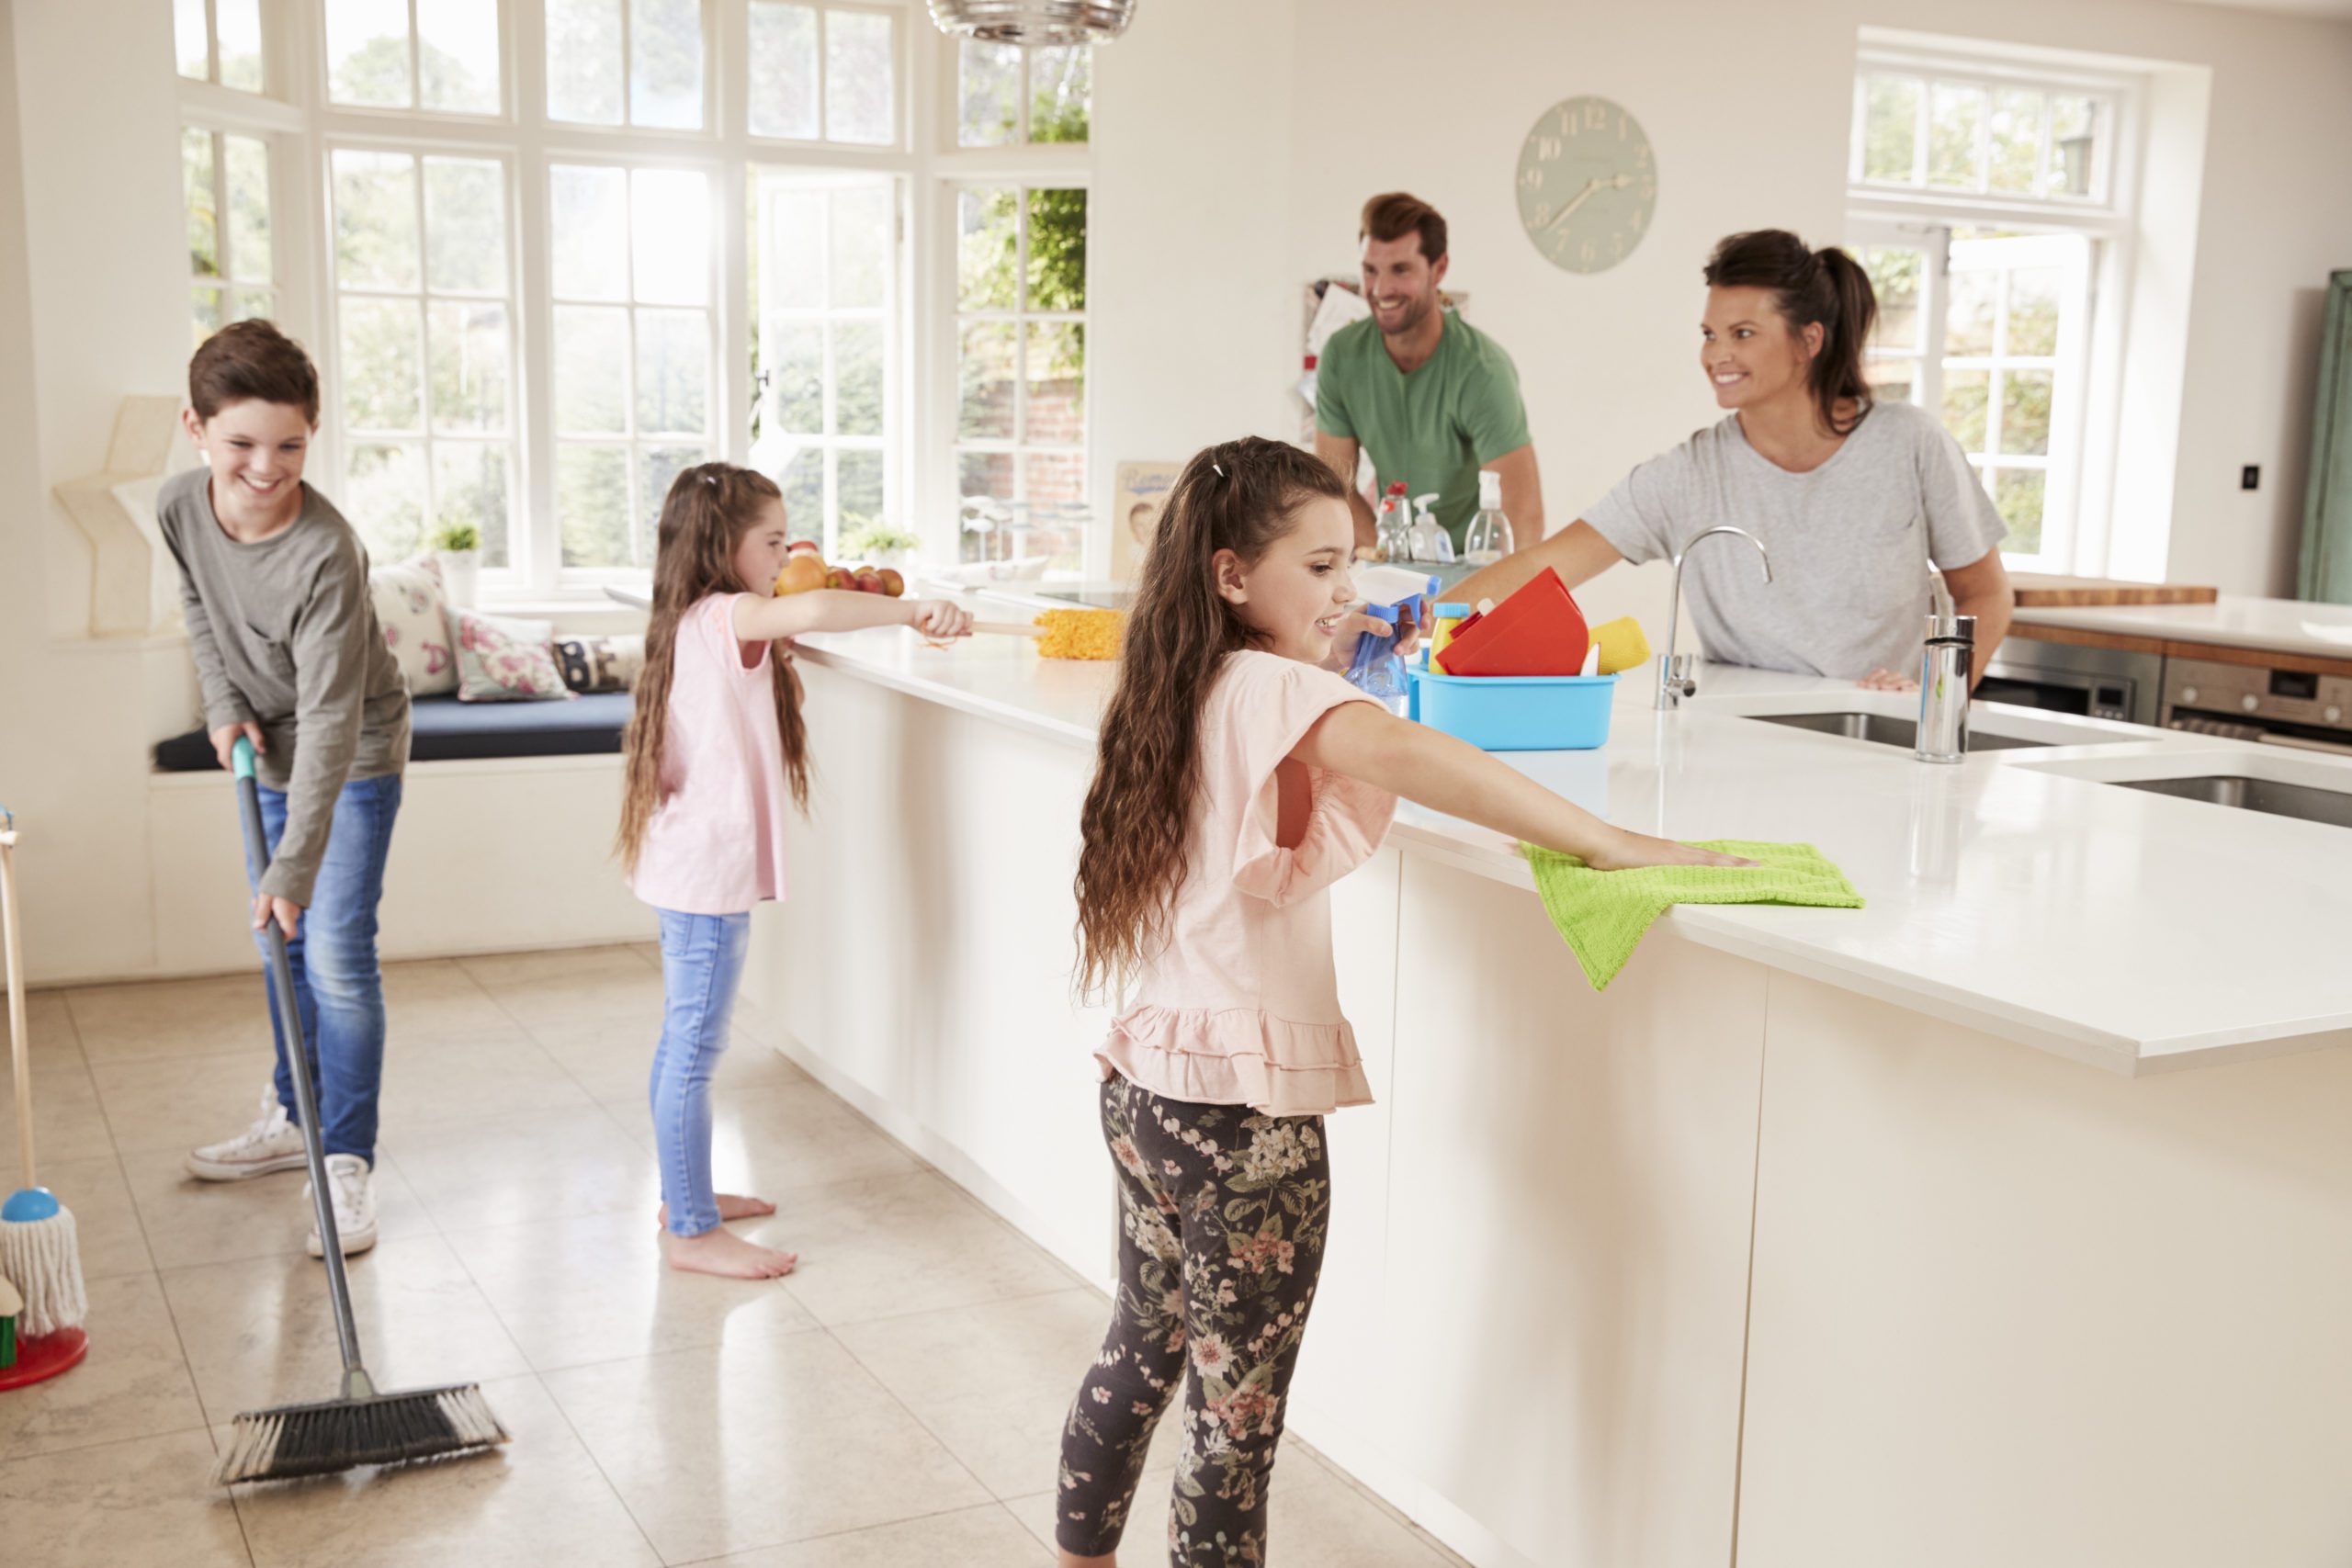 Children Helping Parents With Household Chores In Kitchen